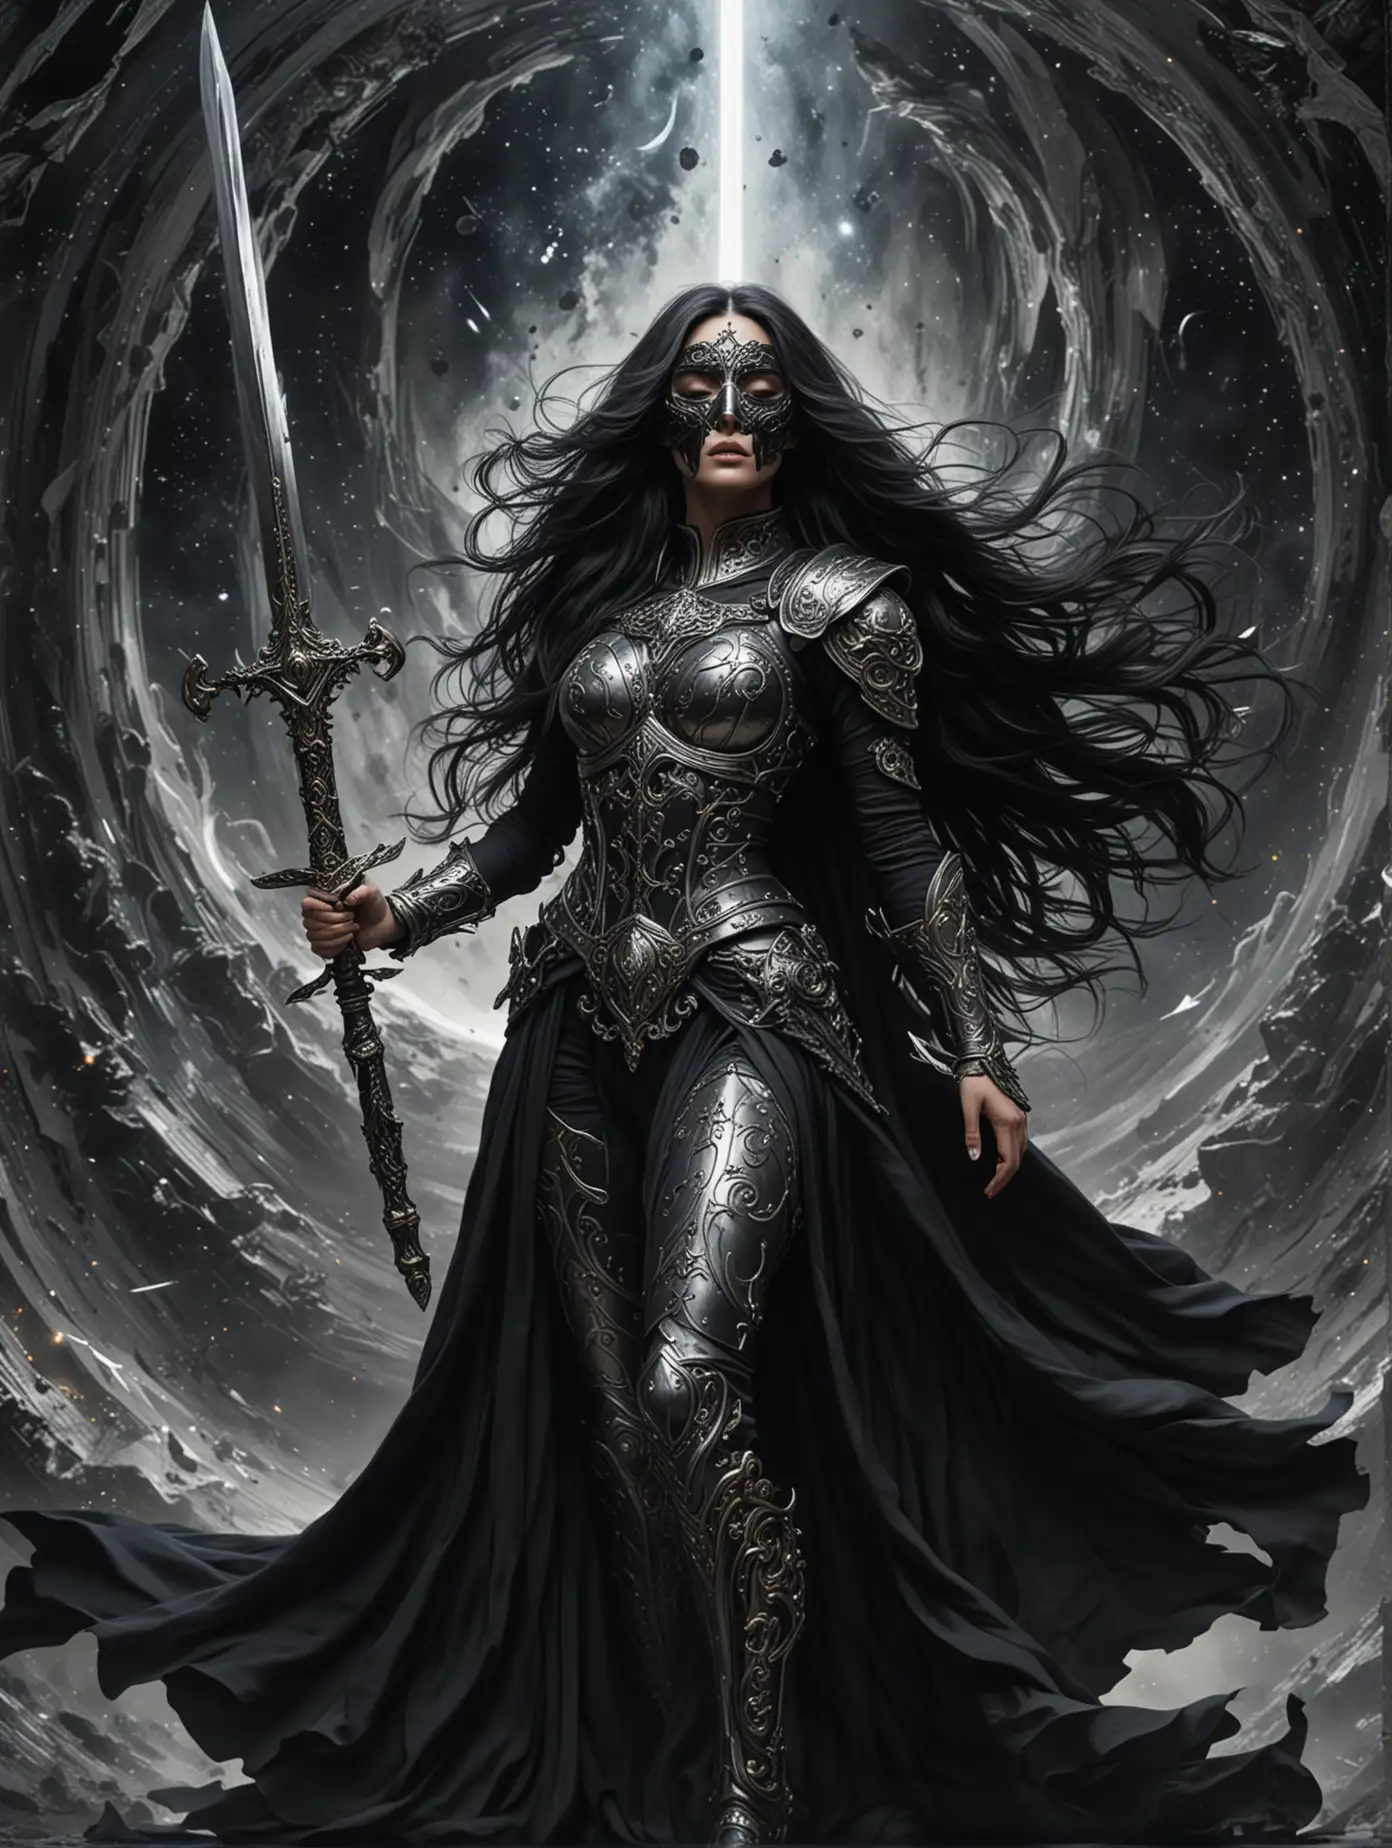 Military woman, black long hair flowing in the wind. The entire face is covered by an ornate black mask, eyes closed. Black dress, silver armor, large sword raised upwards in hand. Woman stands full height in space against a black hole.